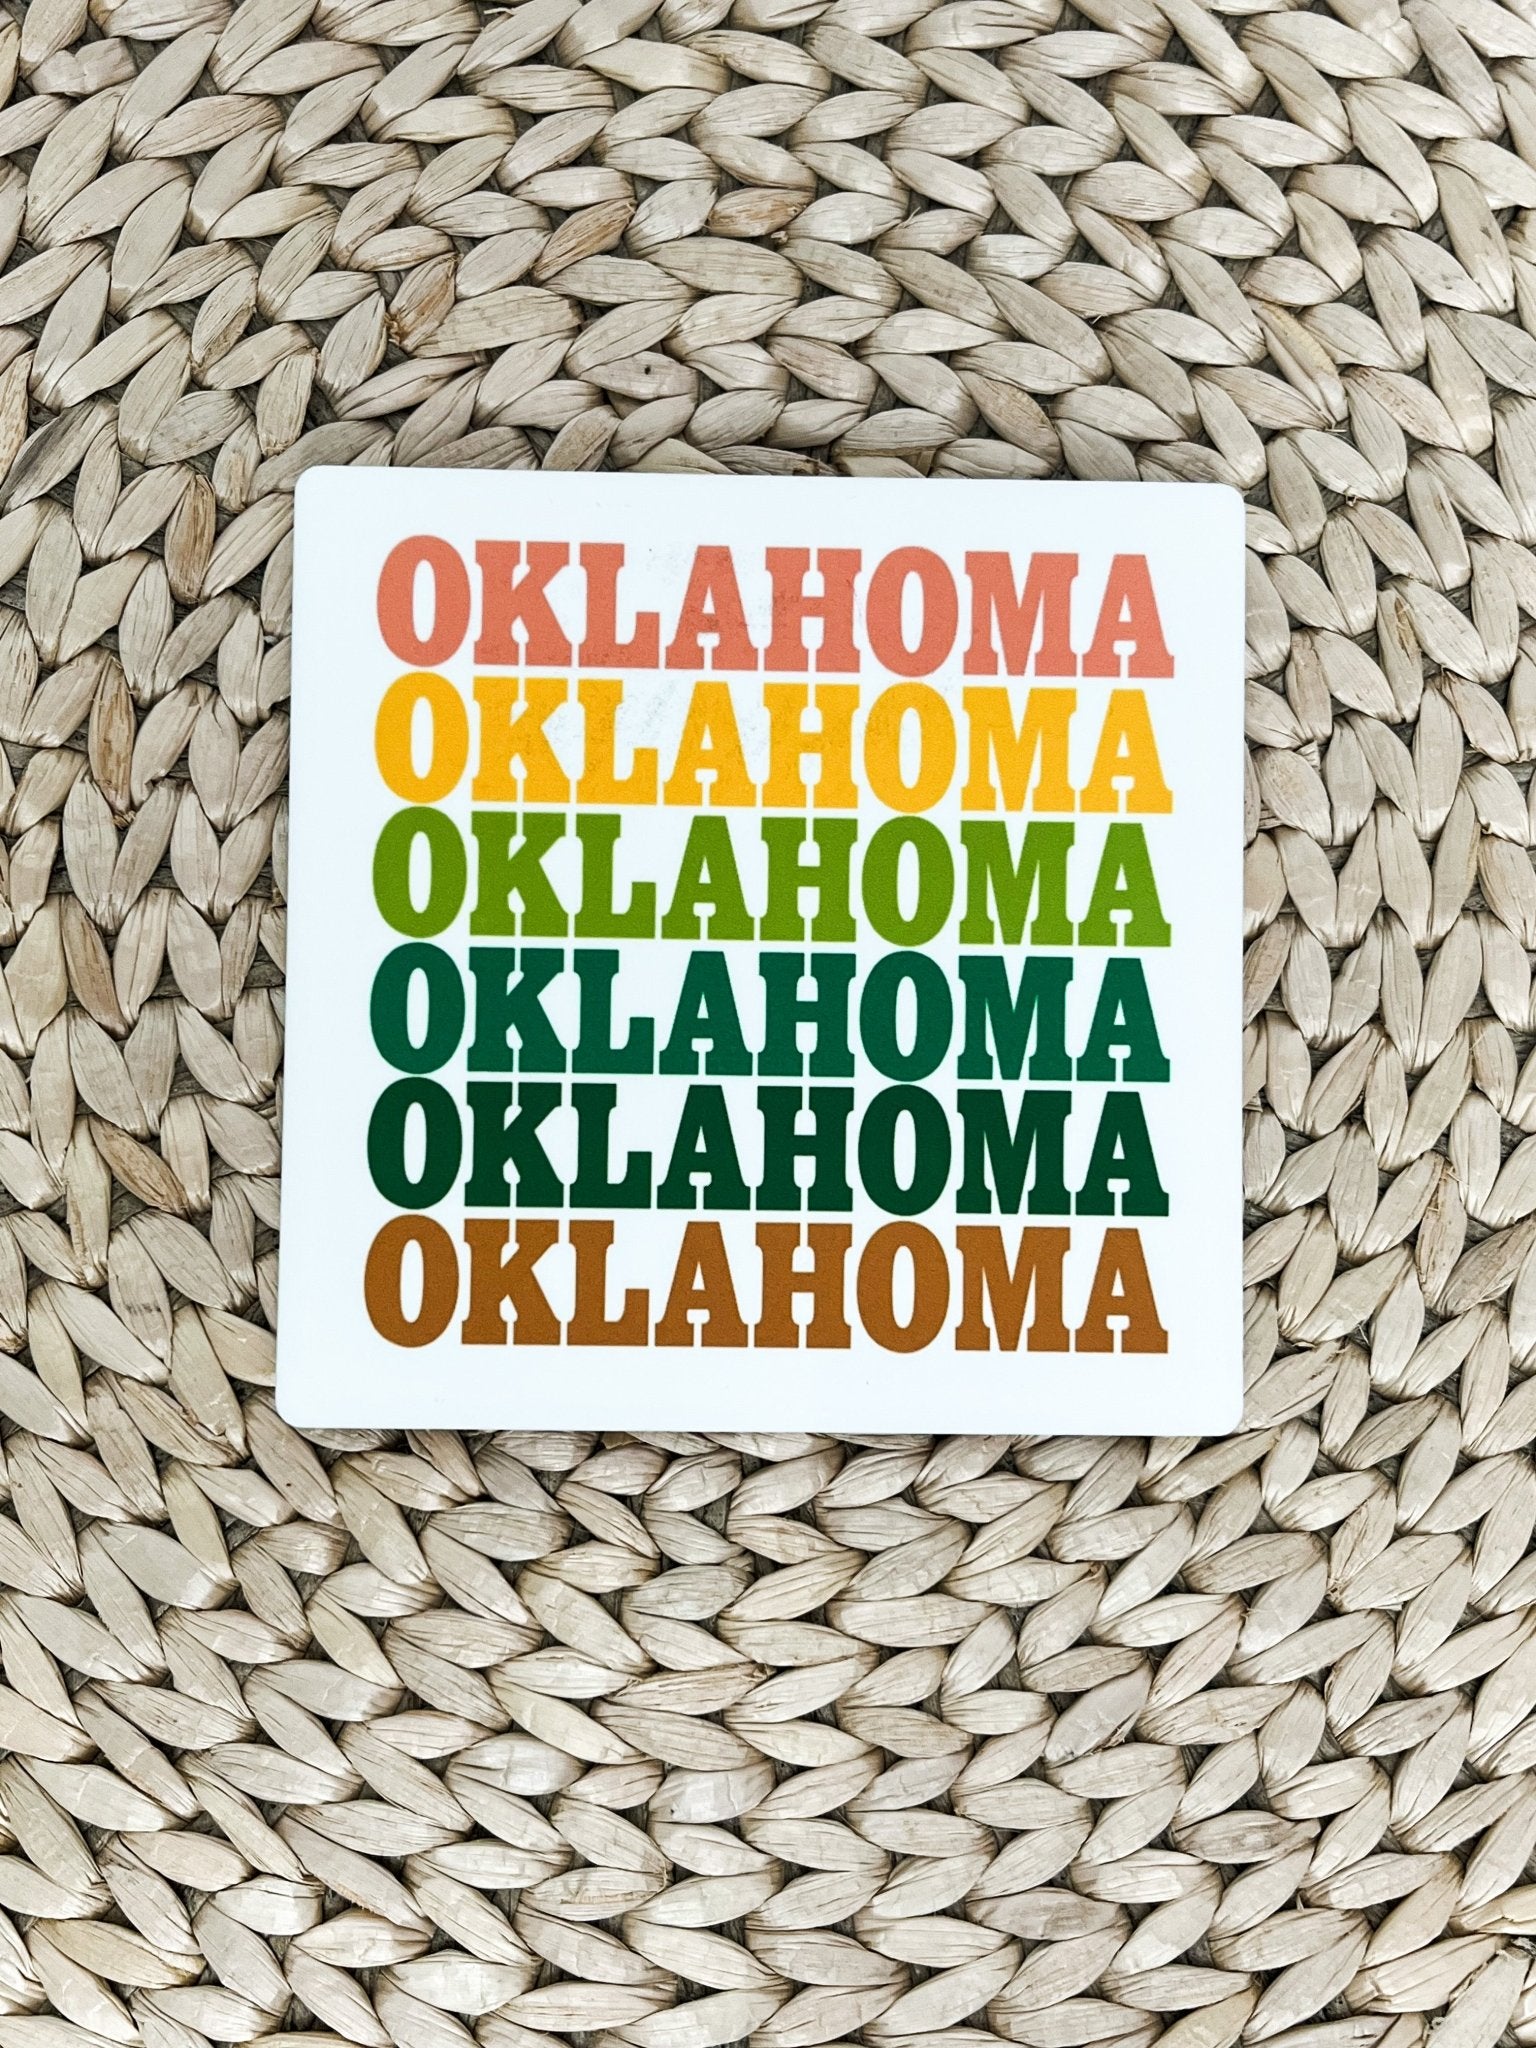 Oklahoma repeater coaster - Trendy Gifts at Lush Fashion Lounge Boutique in Oklahoma City